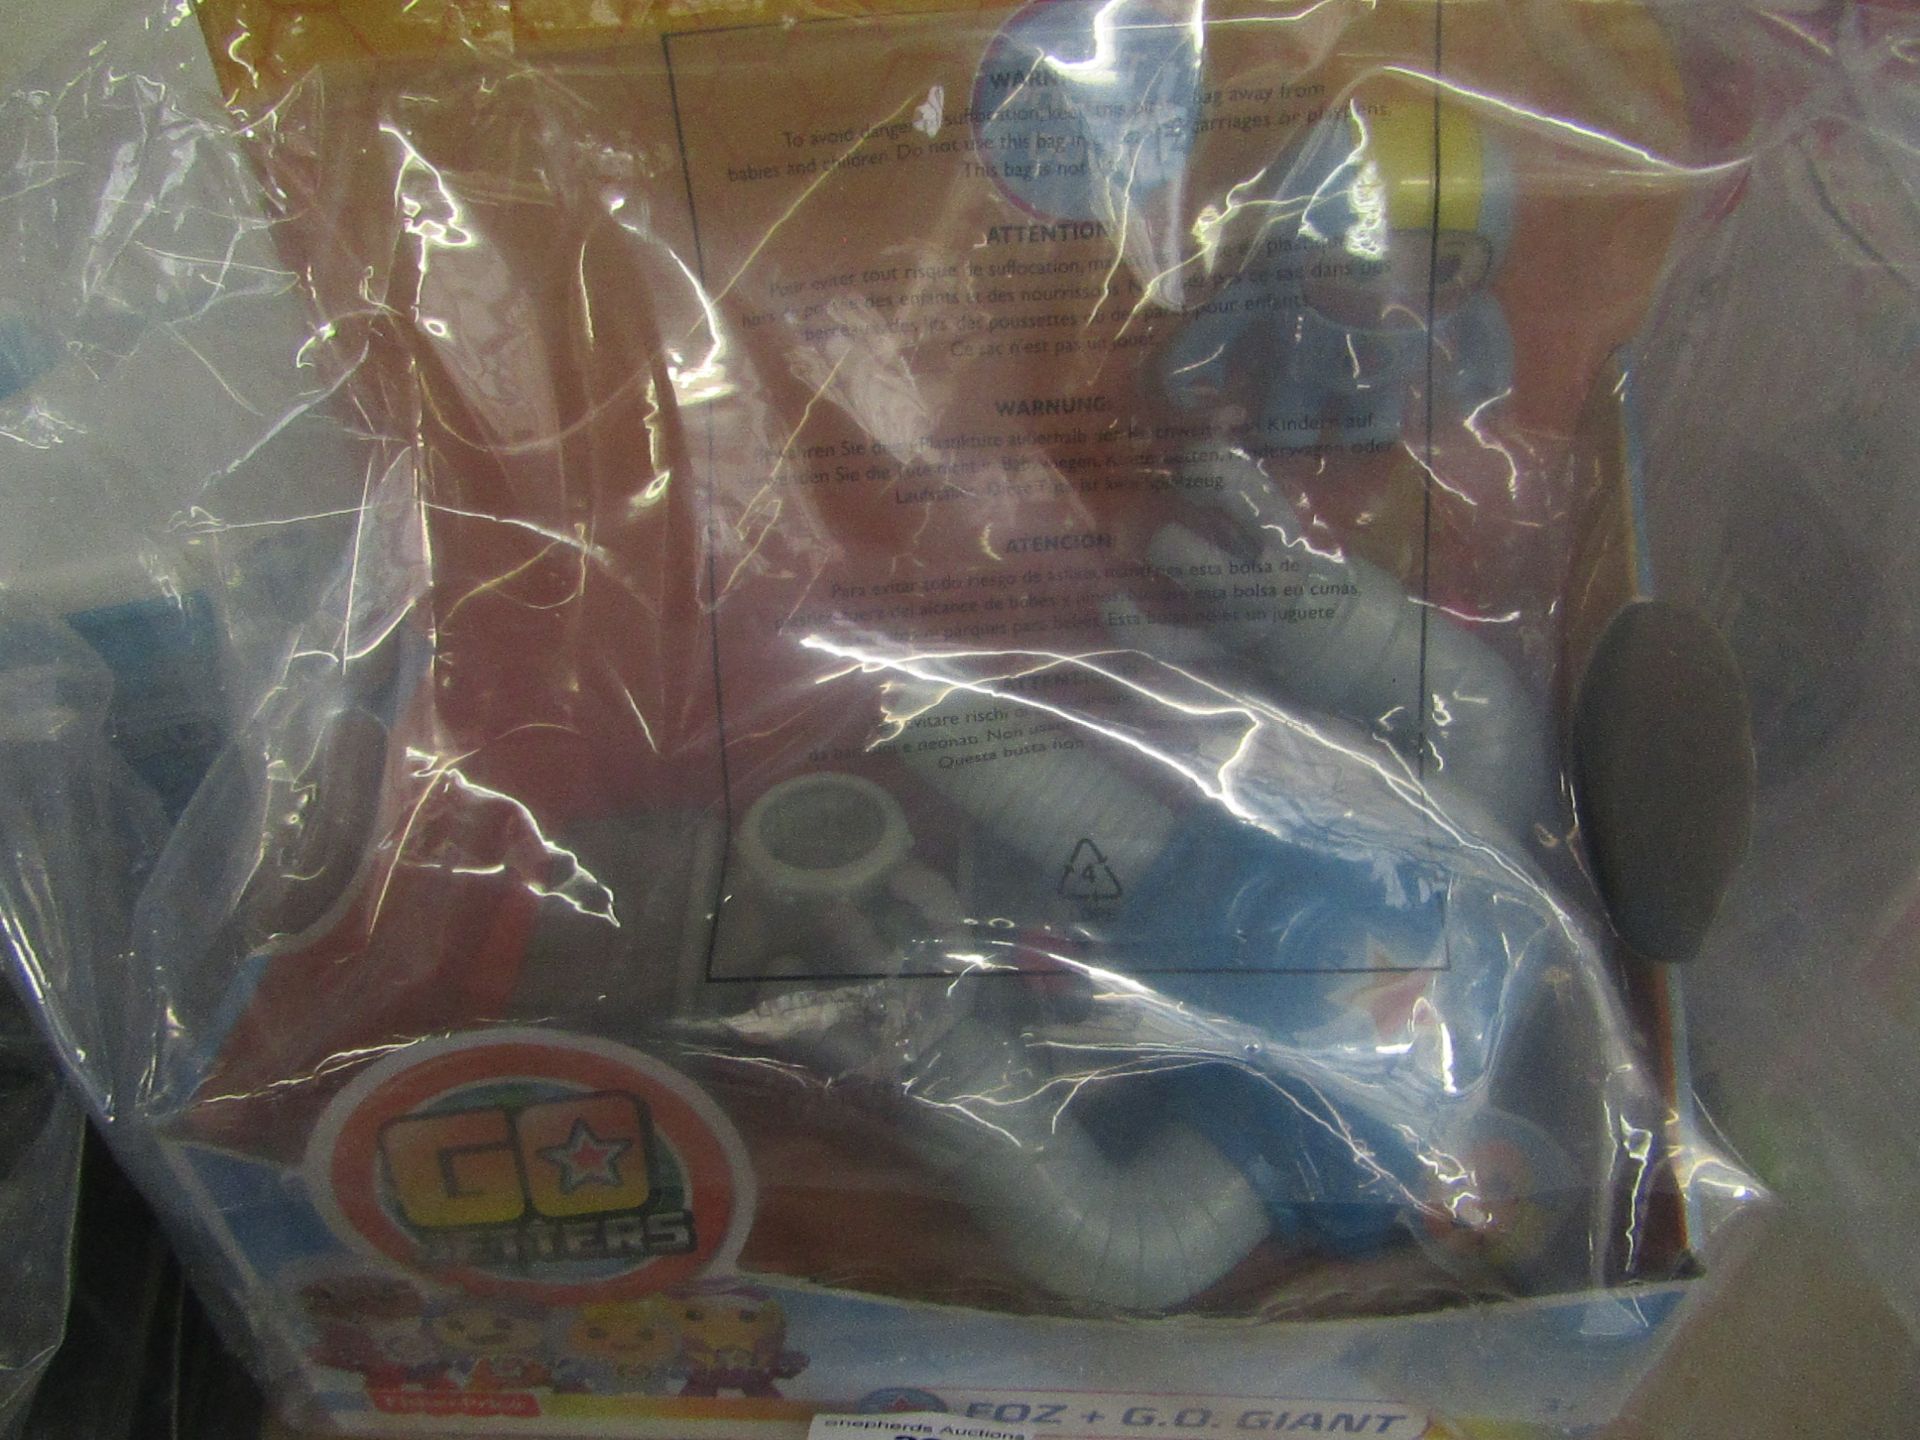 Fisher Pirice Go Jetters Figure. Packaging is damaged so has been rebagged